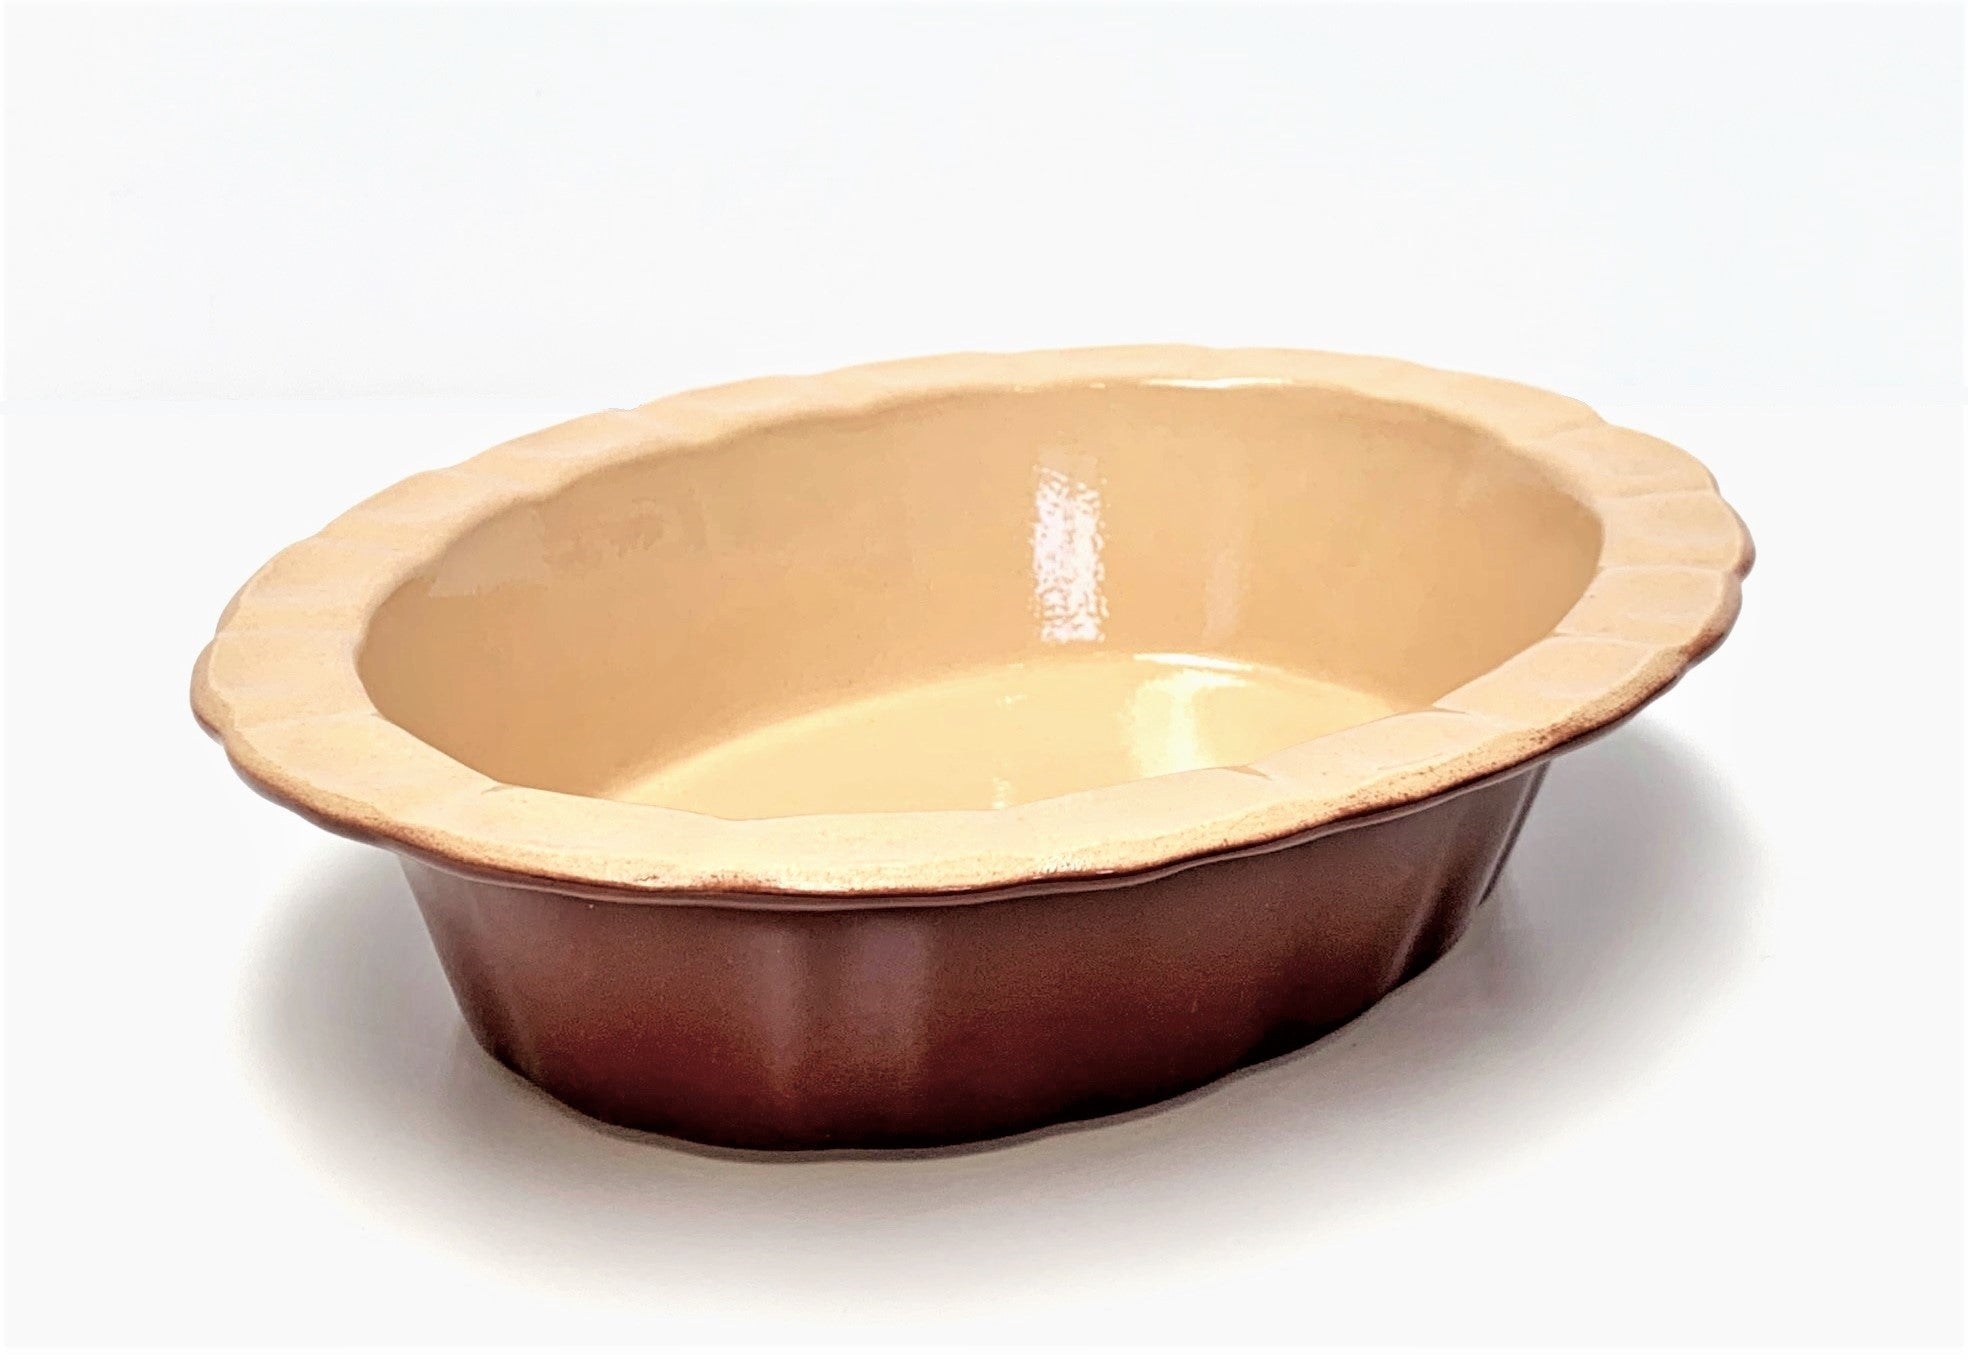 Poterie Renault Oval Pie Dish Large (2.5 L) - Brown Ceramic Poterie Renault Brand_Poterie Renault Home_Decor New Arrivals Poterie Renault PC115